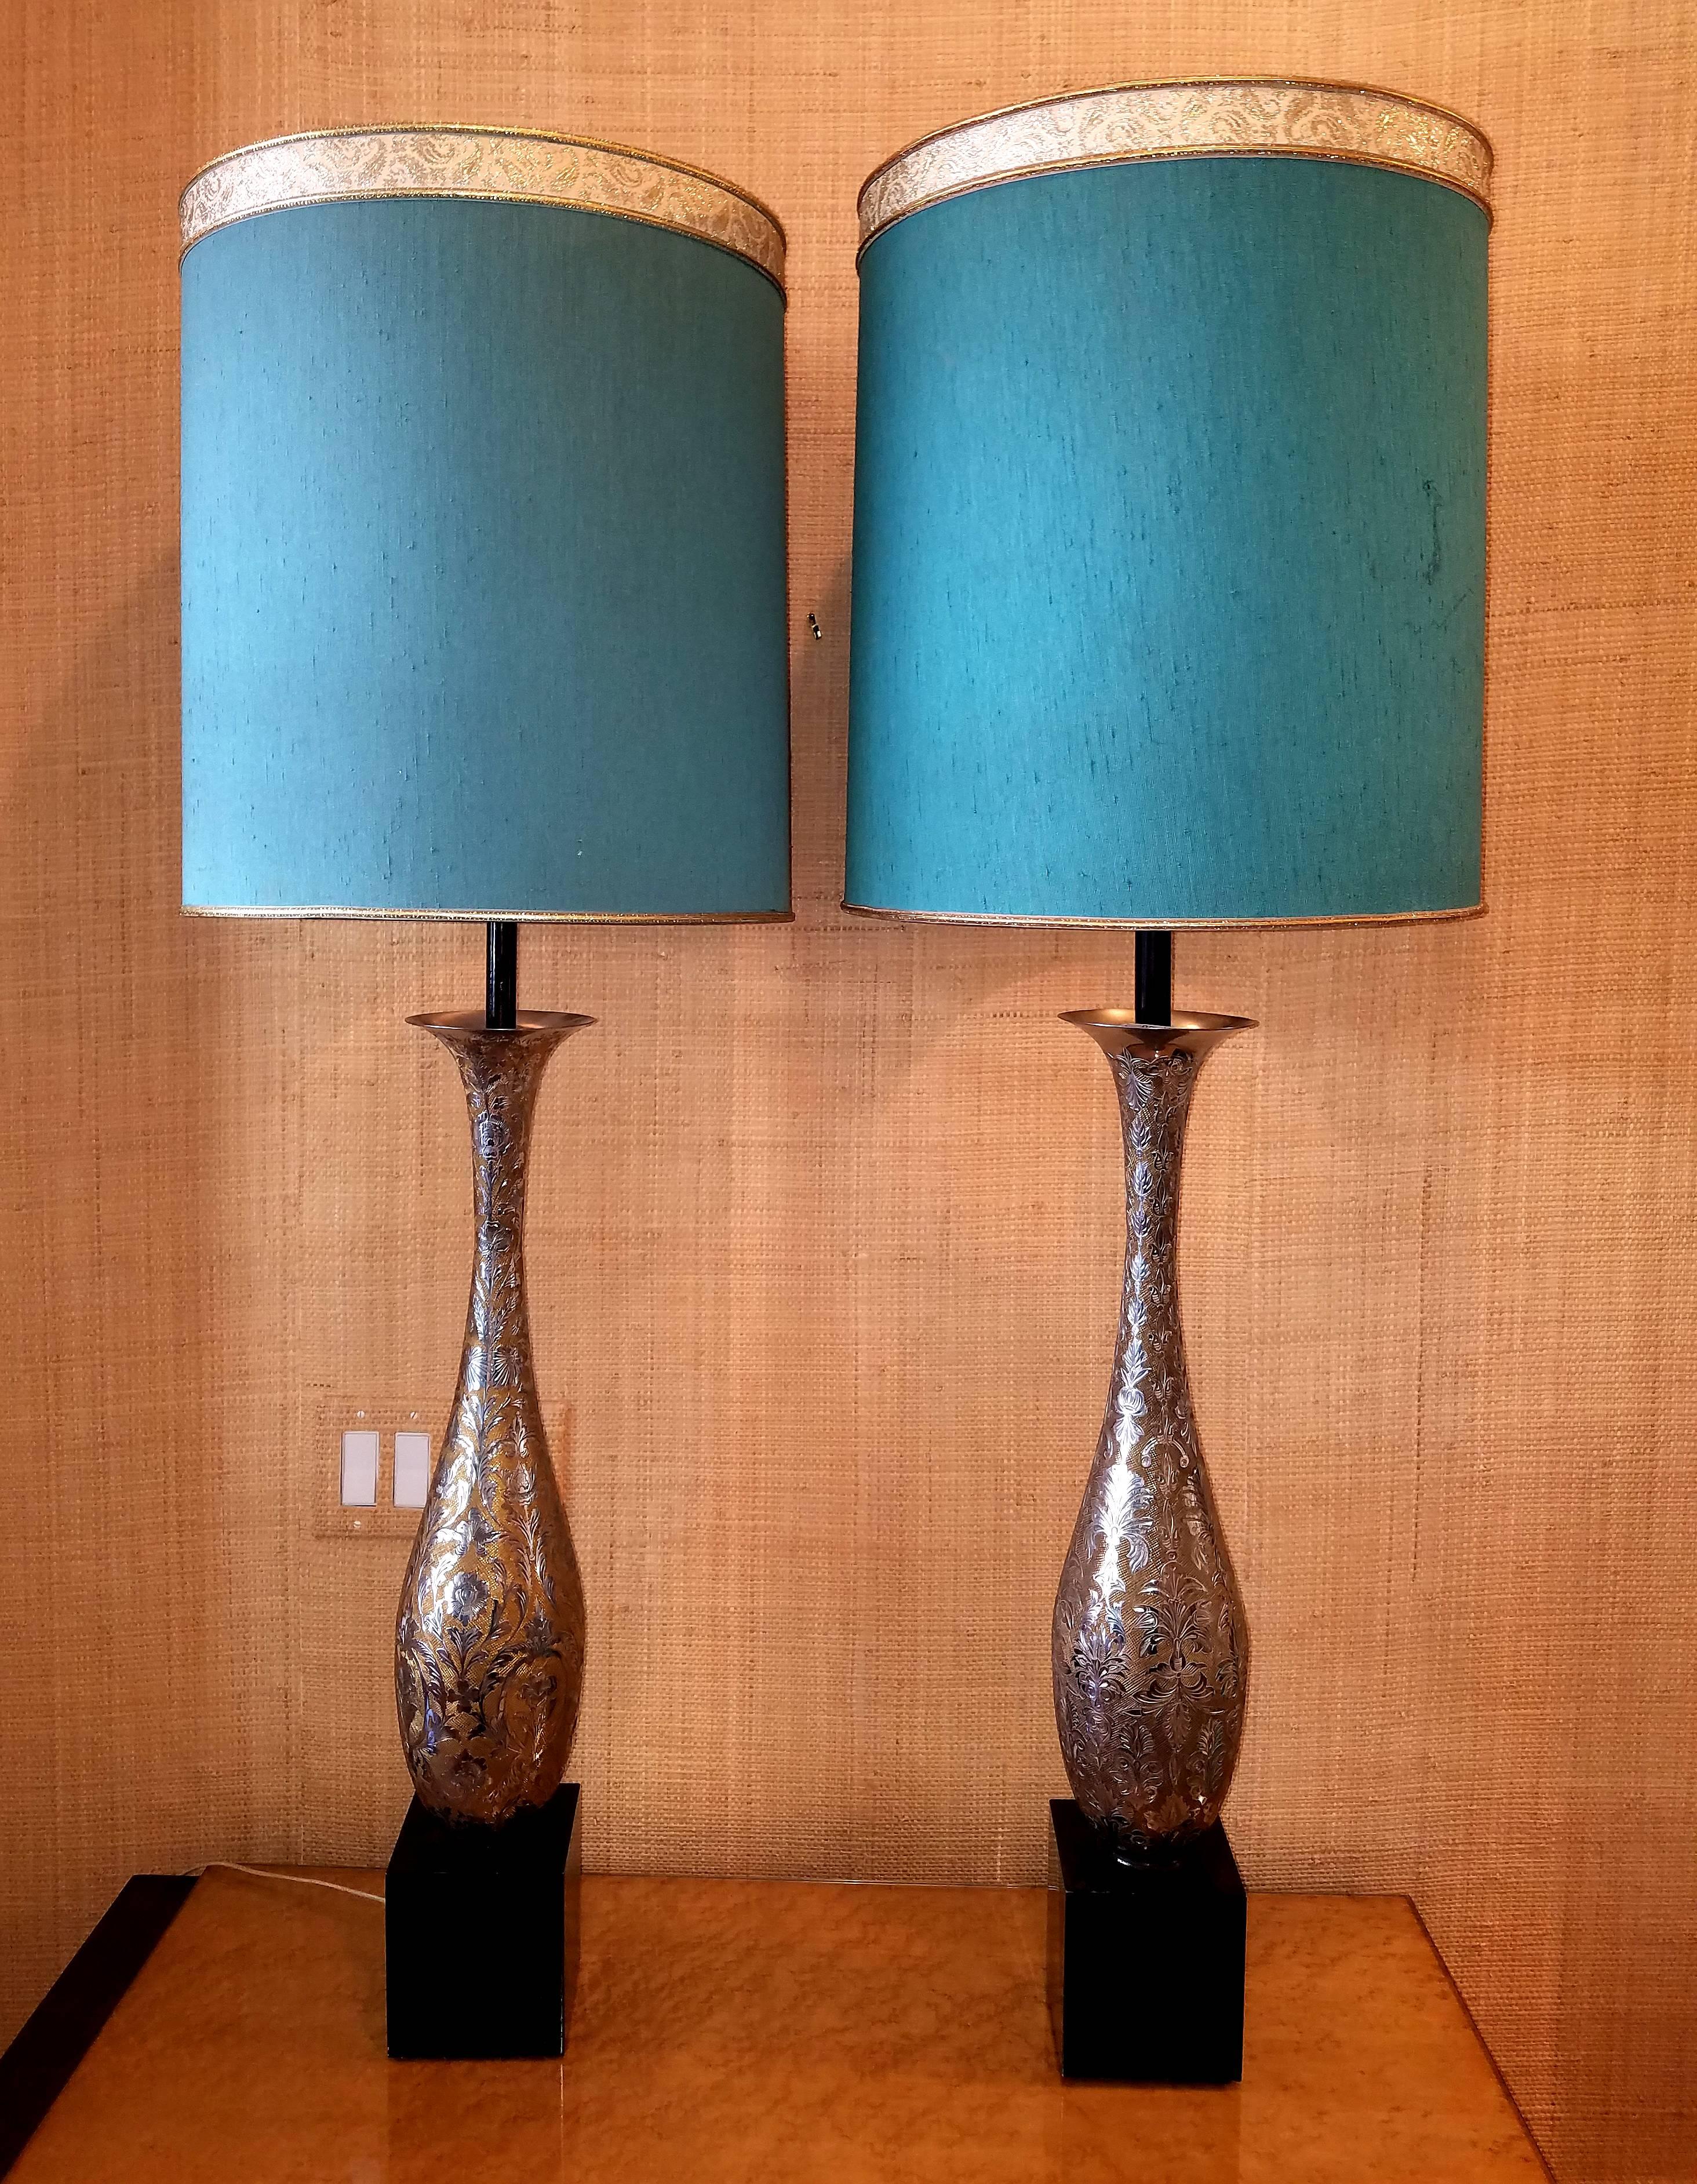 Pair of etched and silvered brass table lamps from India made in the Persian style. Large-scale and beautifully proportioned with delicate integrated decoration. Retaining the original shades. Each lamp has a different pattern. Beautiful and very